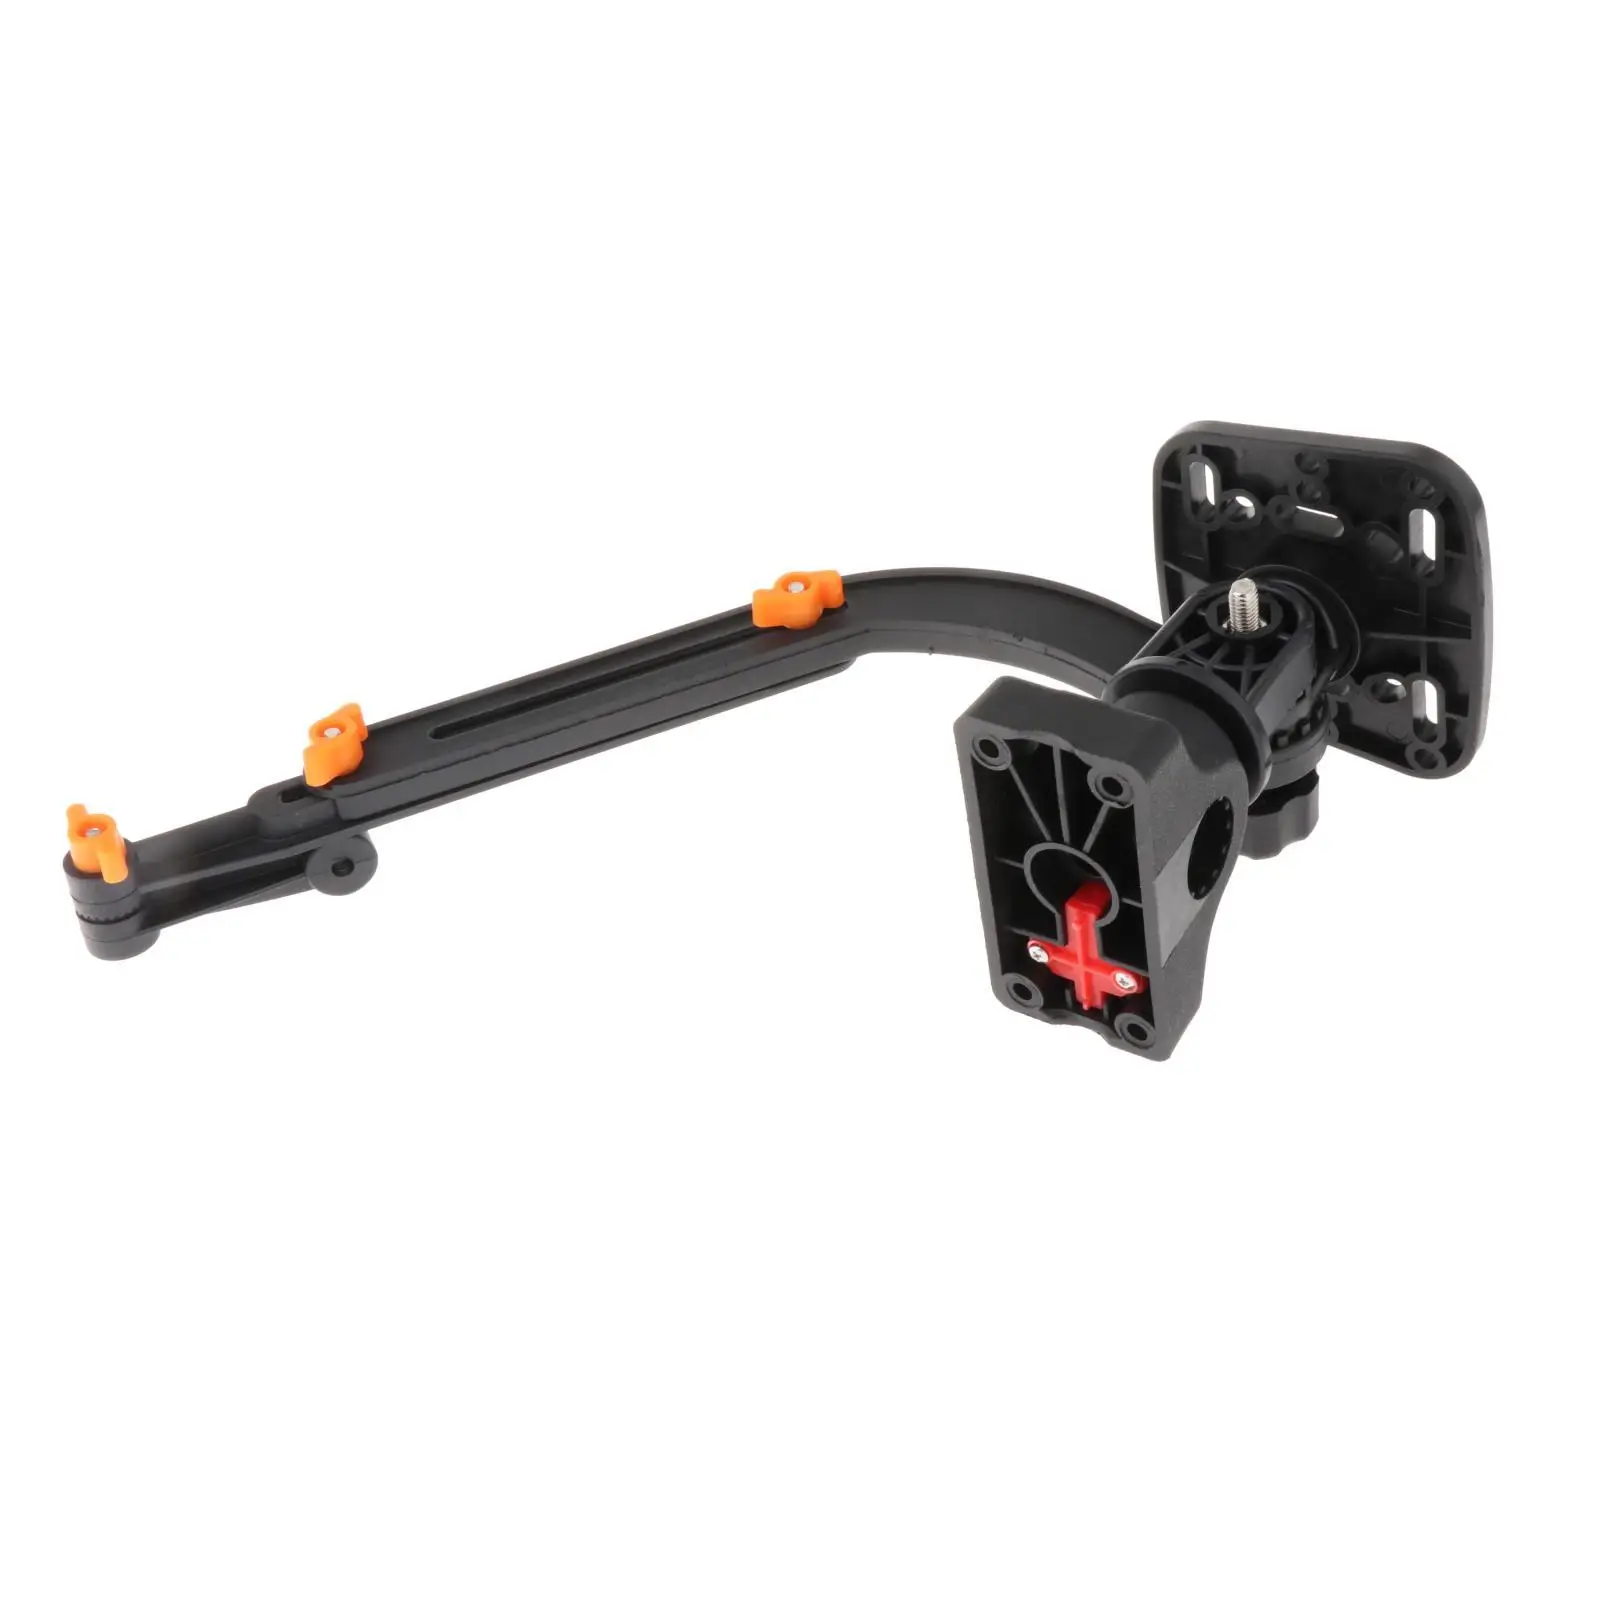 Fish Finder Mount Mounting Plate Electronic Fishfinder Mount Bracket for Kayak Canoe Yacht Accessories Fish Finder Installation